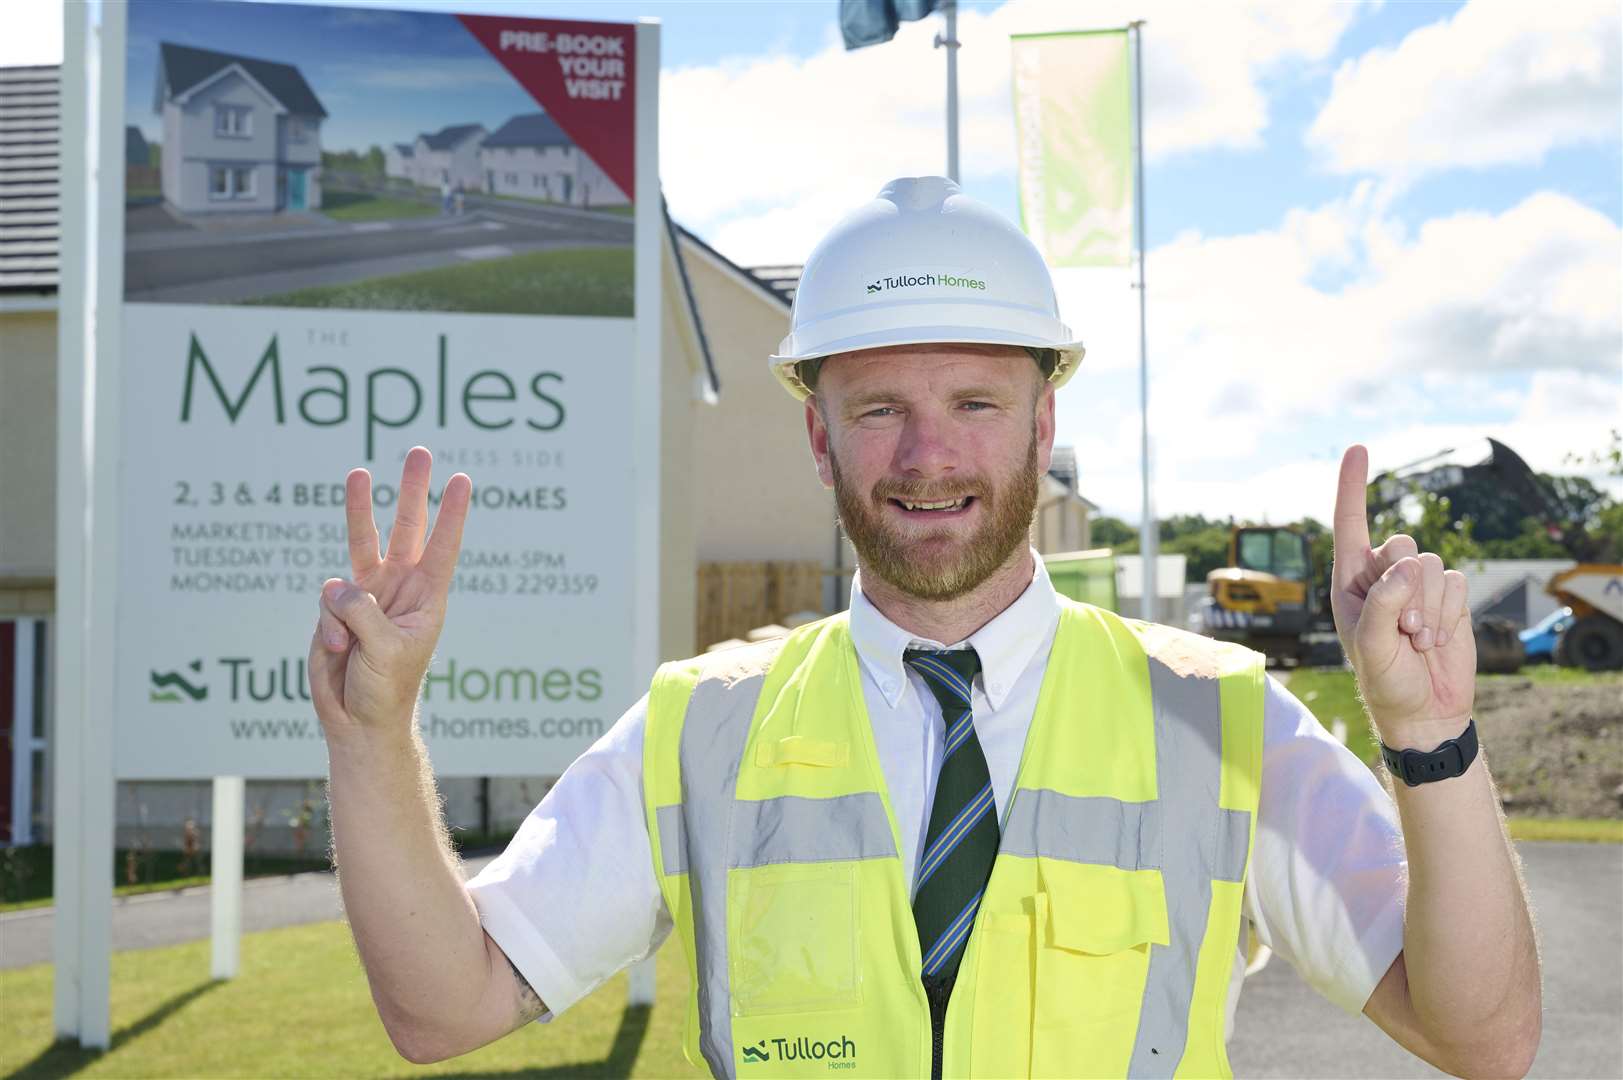 Lewis MacKinnon at The Maples has won his 3rd NHBC award in succession.